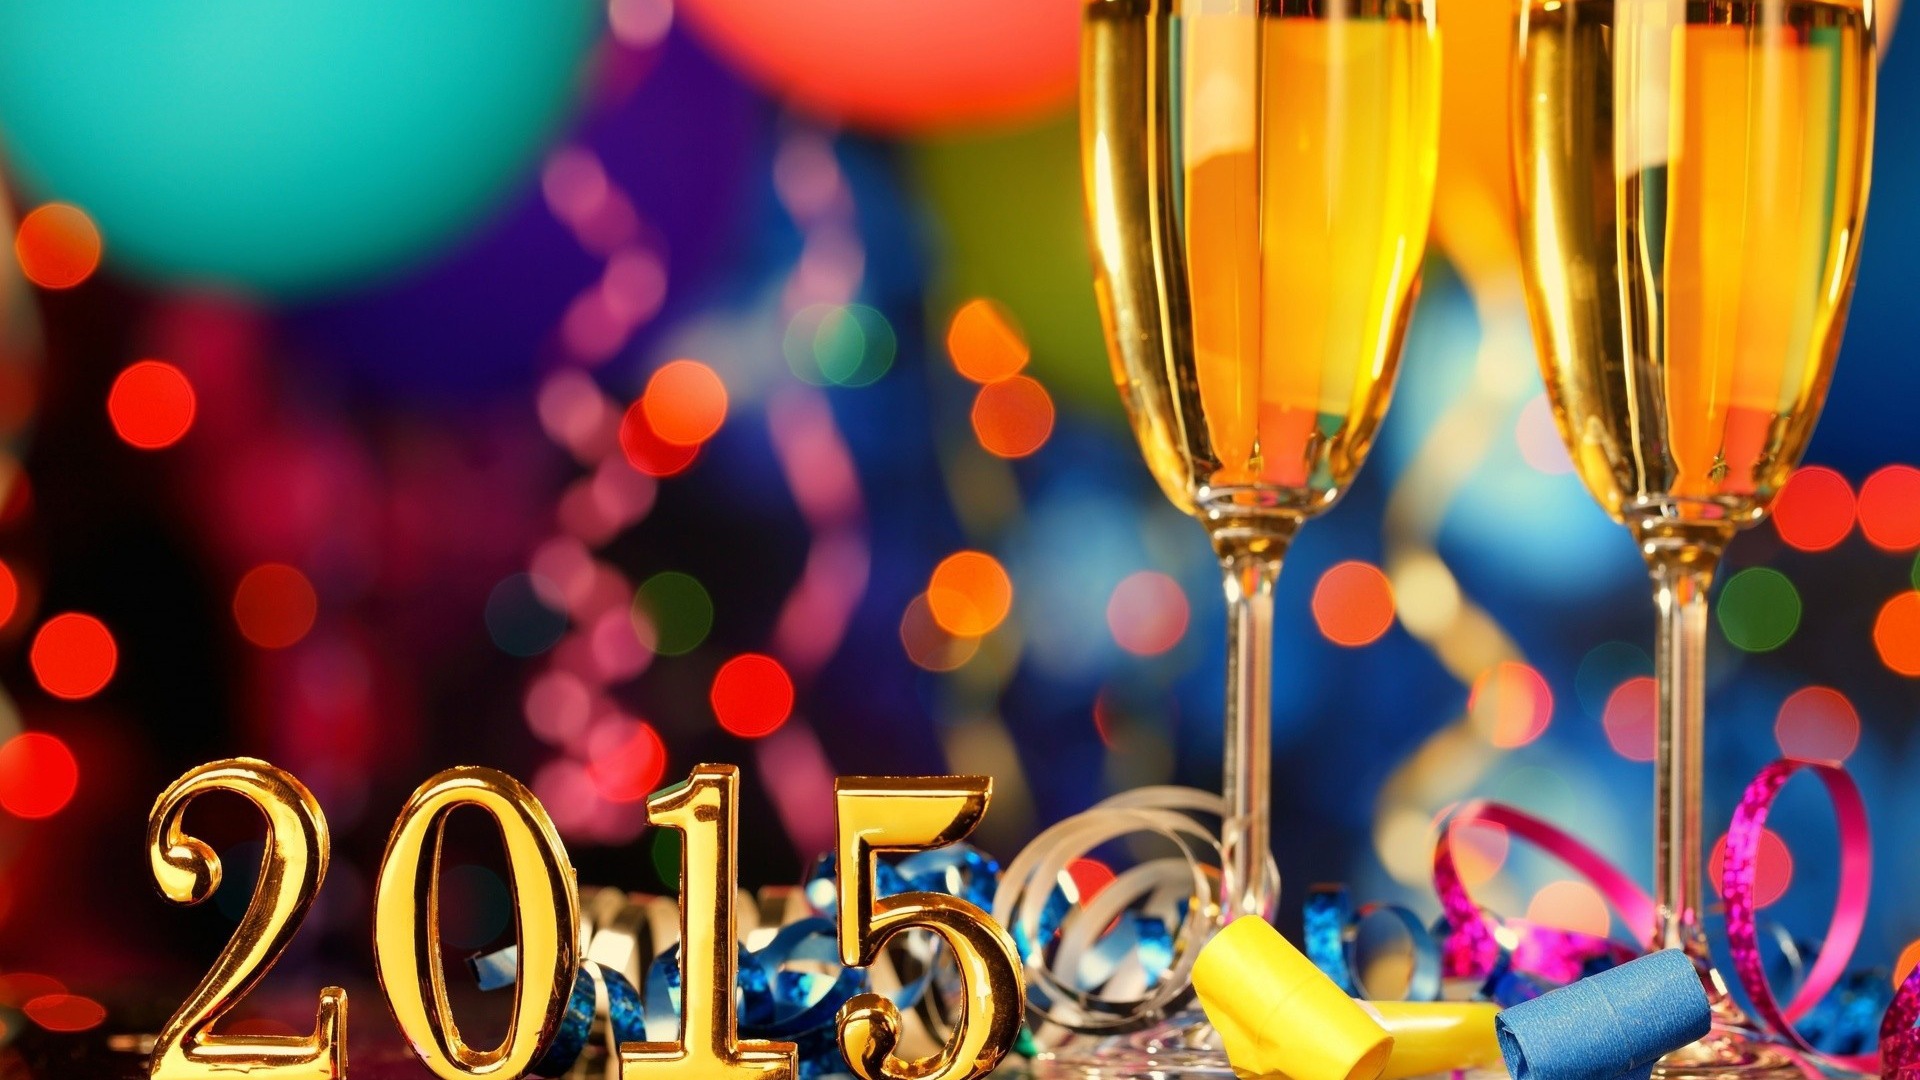 2015 New Year theme HD wallpapers (1) #20 - 1920x1080